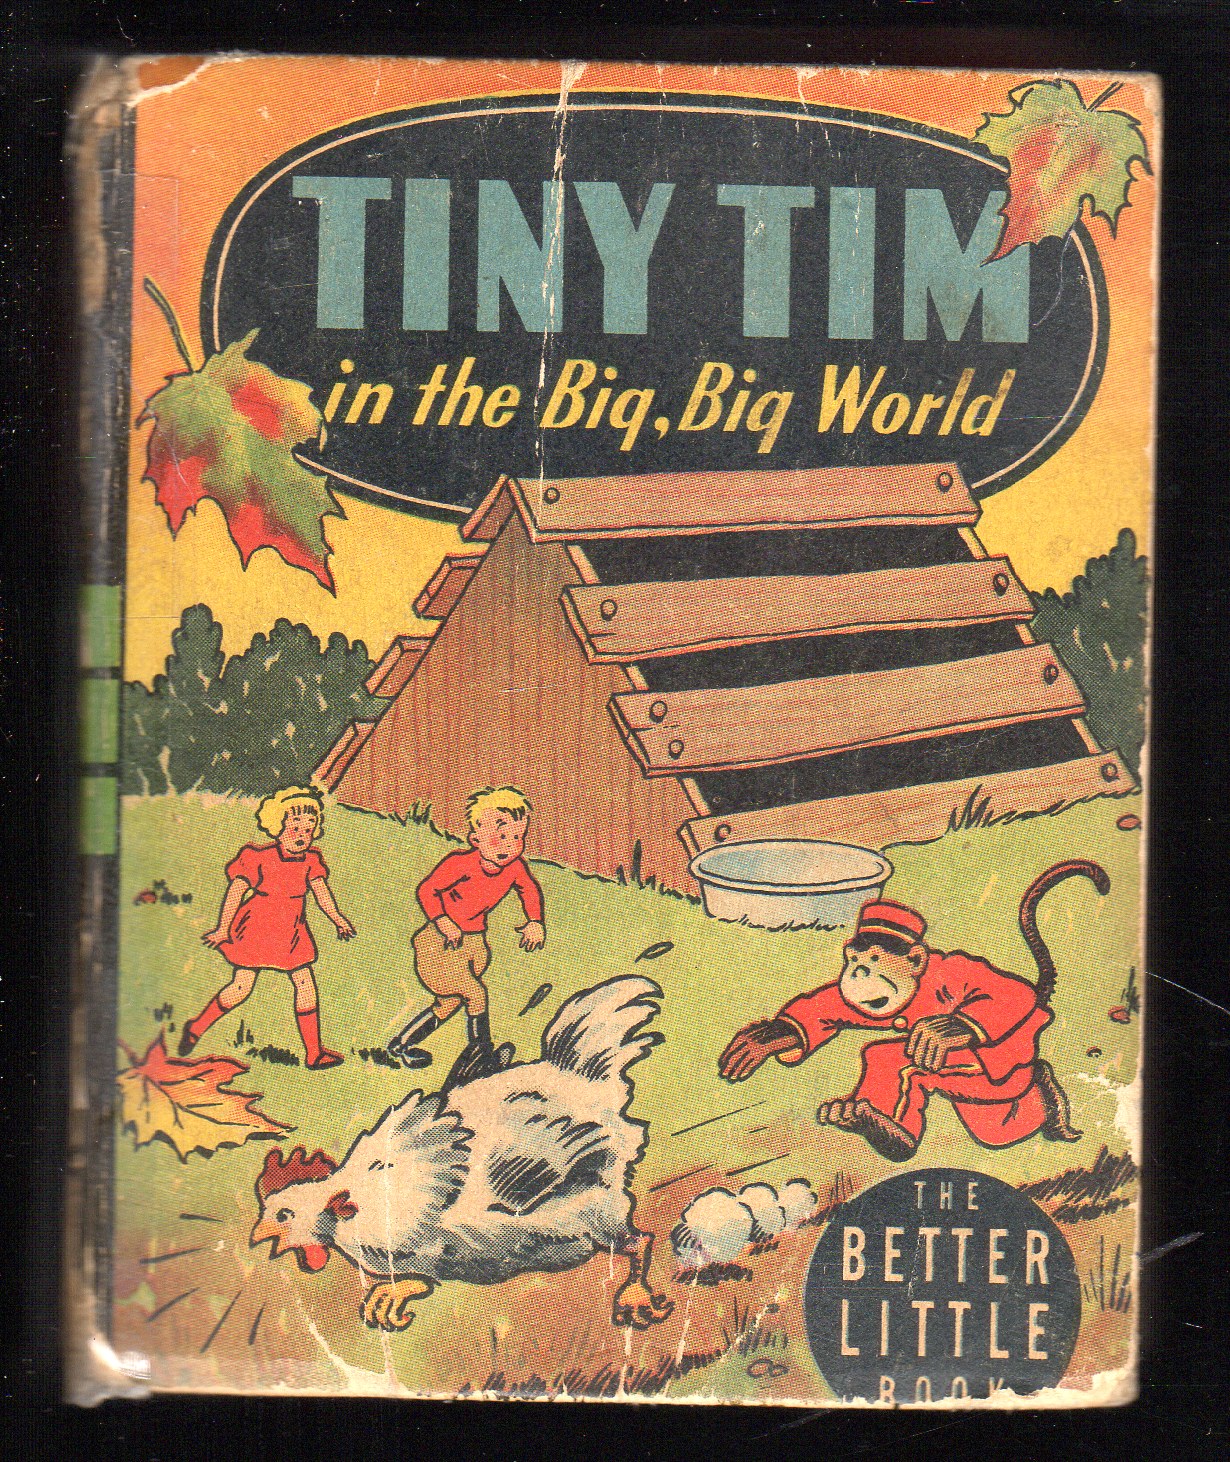 Tiny Tim in the Big, Big World (Better Little Book, 1472) by